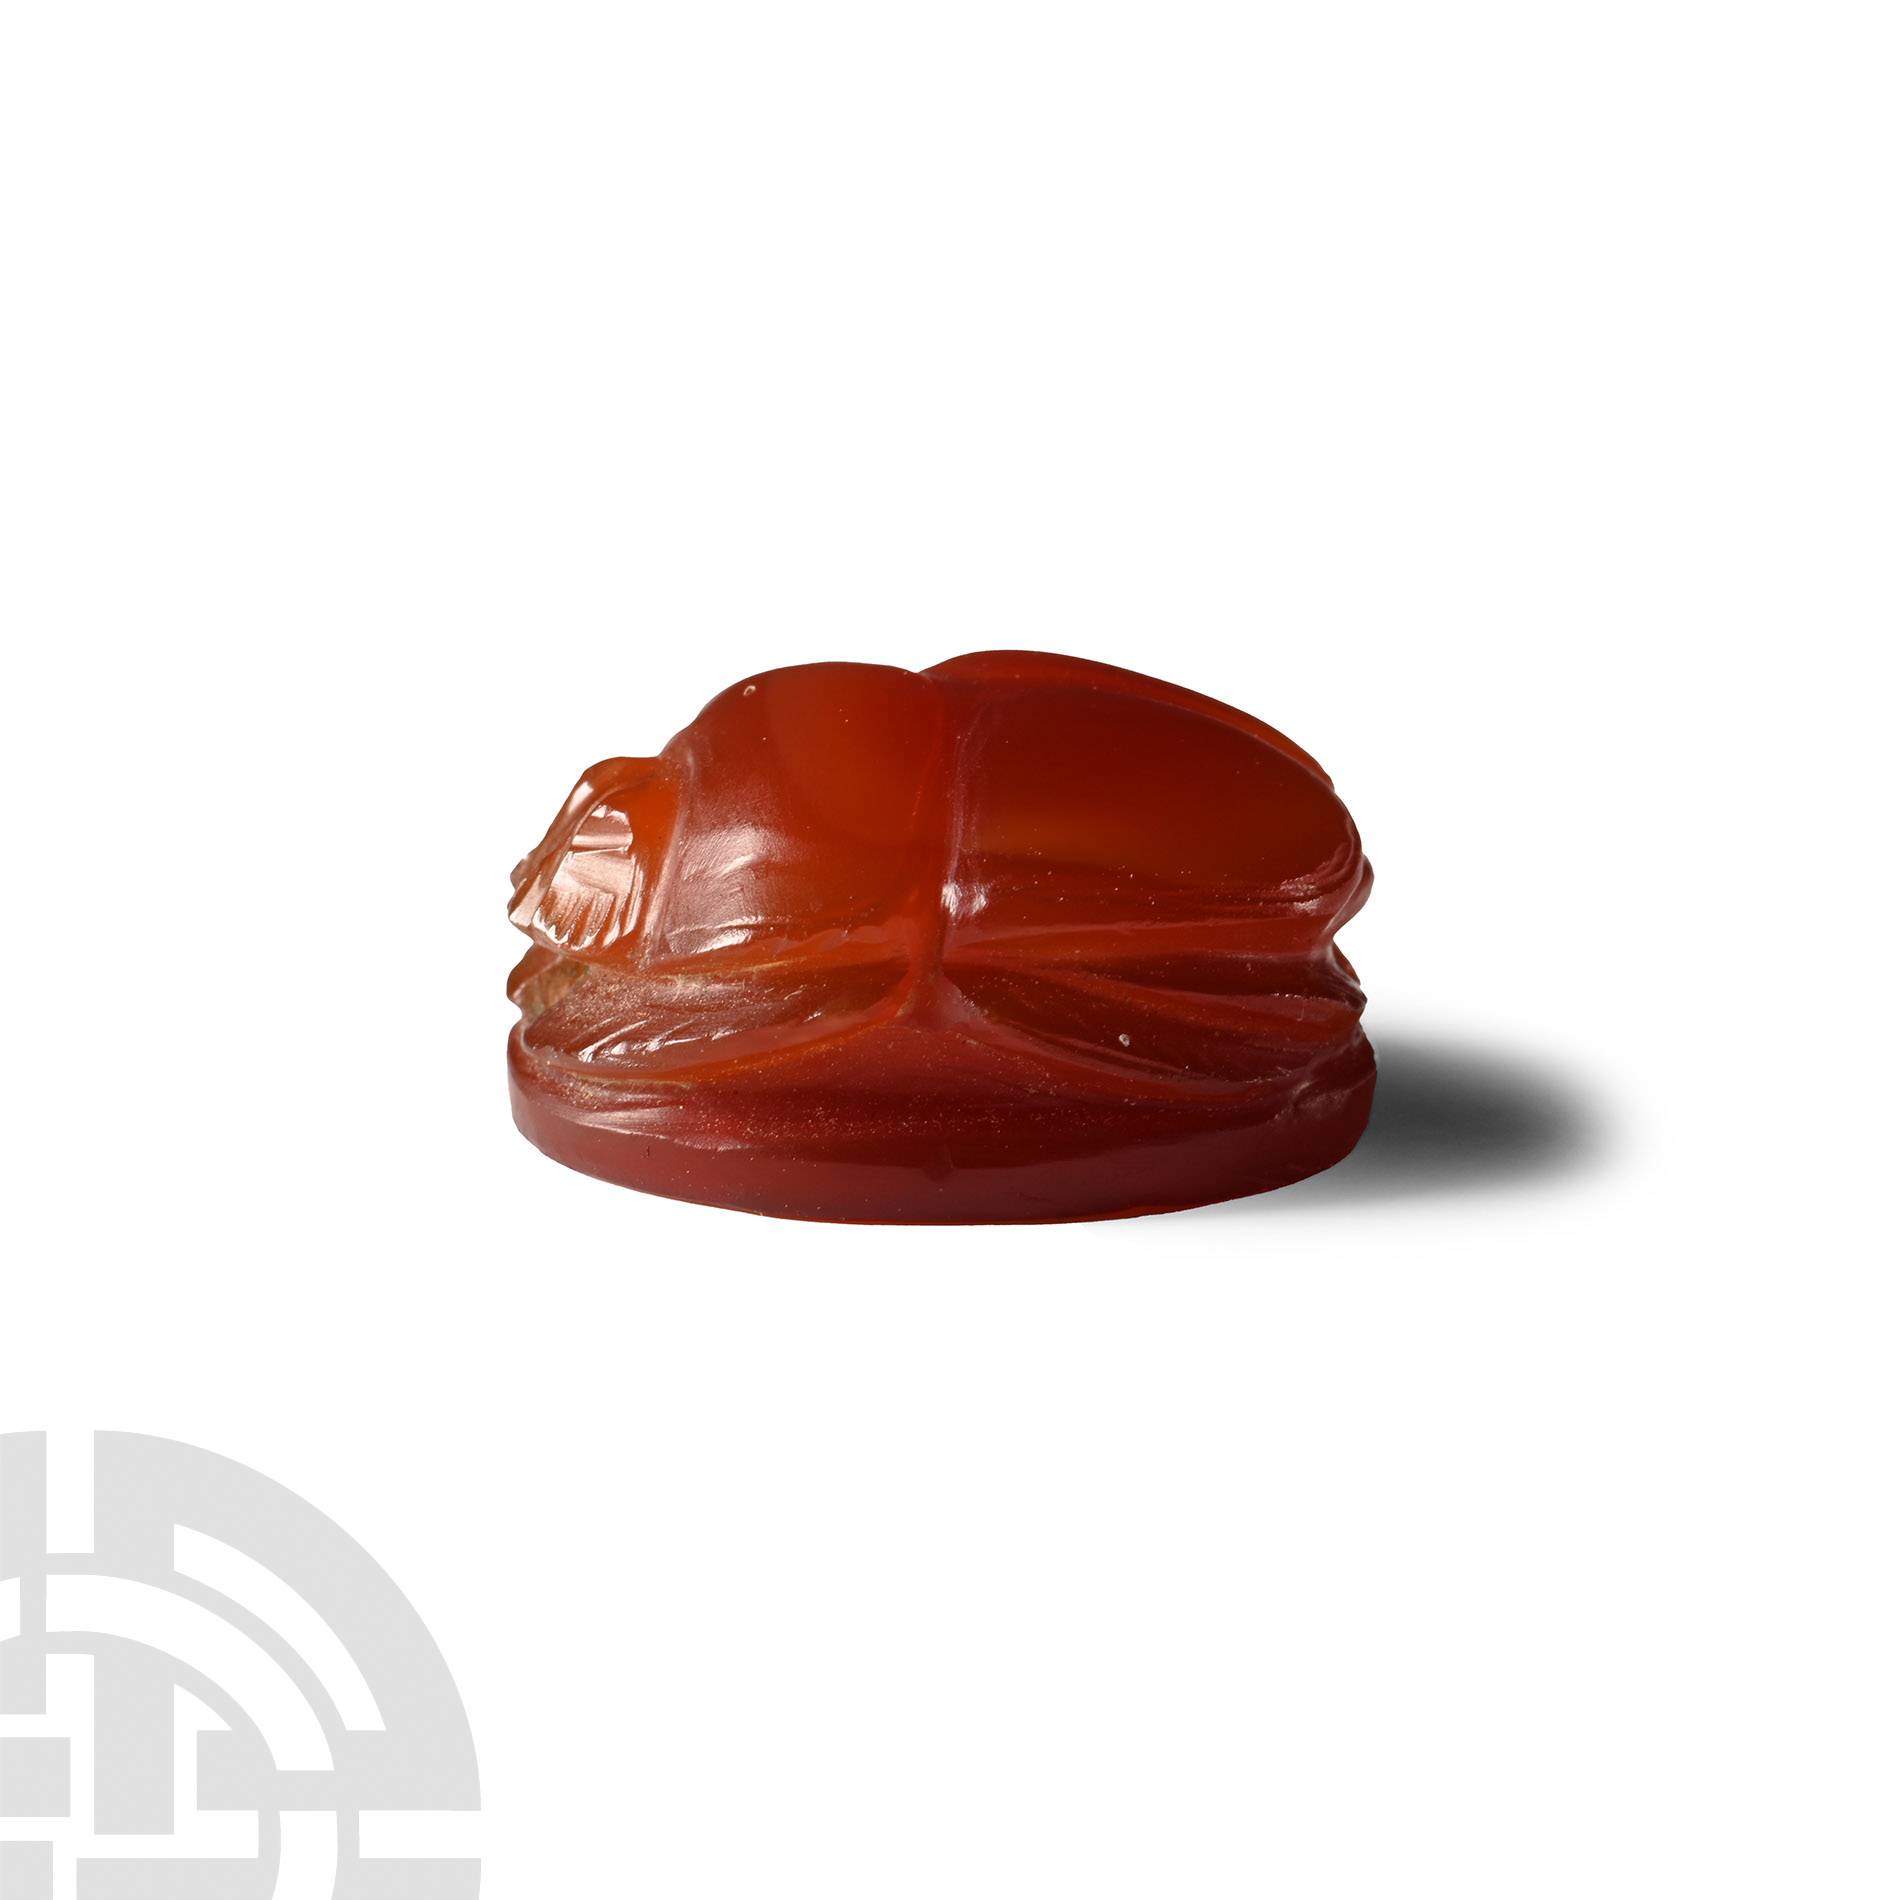 Egyptian Carnelian Scarab with Symbols Representing the Royal Title 'King of Upper and Lower Egypt - Image 2 of 3